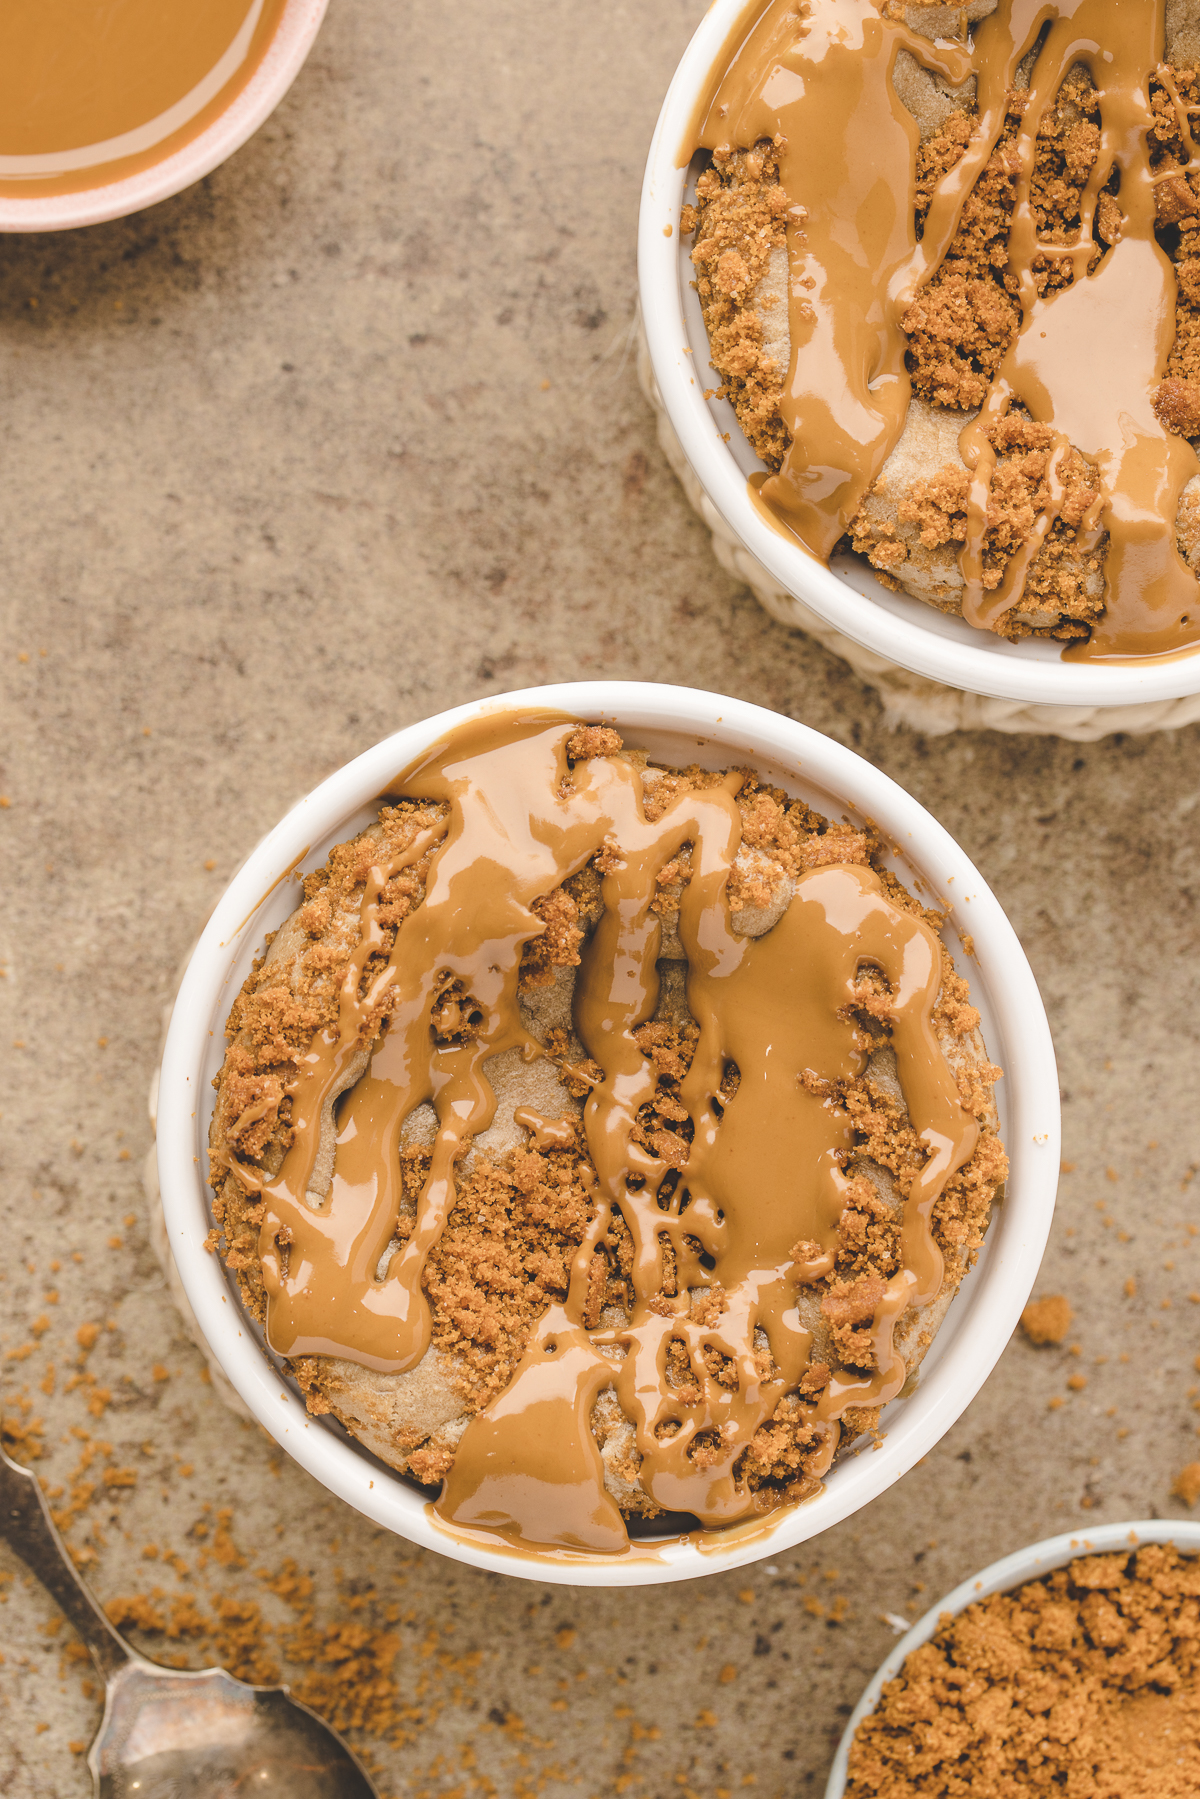 Biscoff baked oats